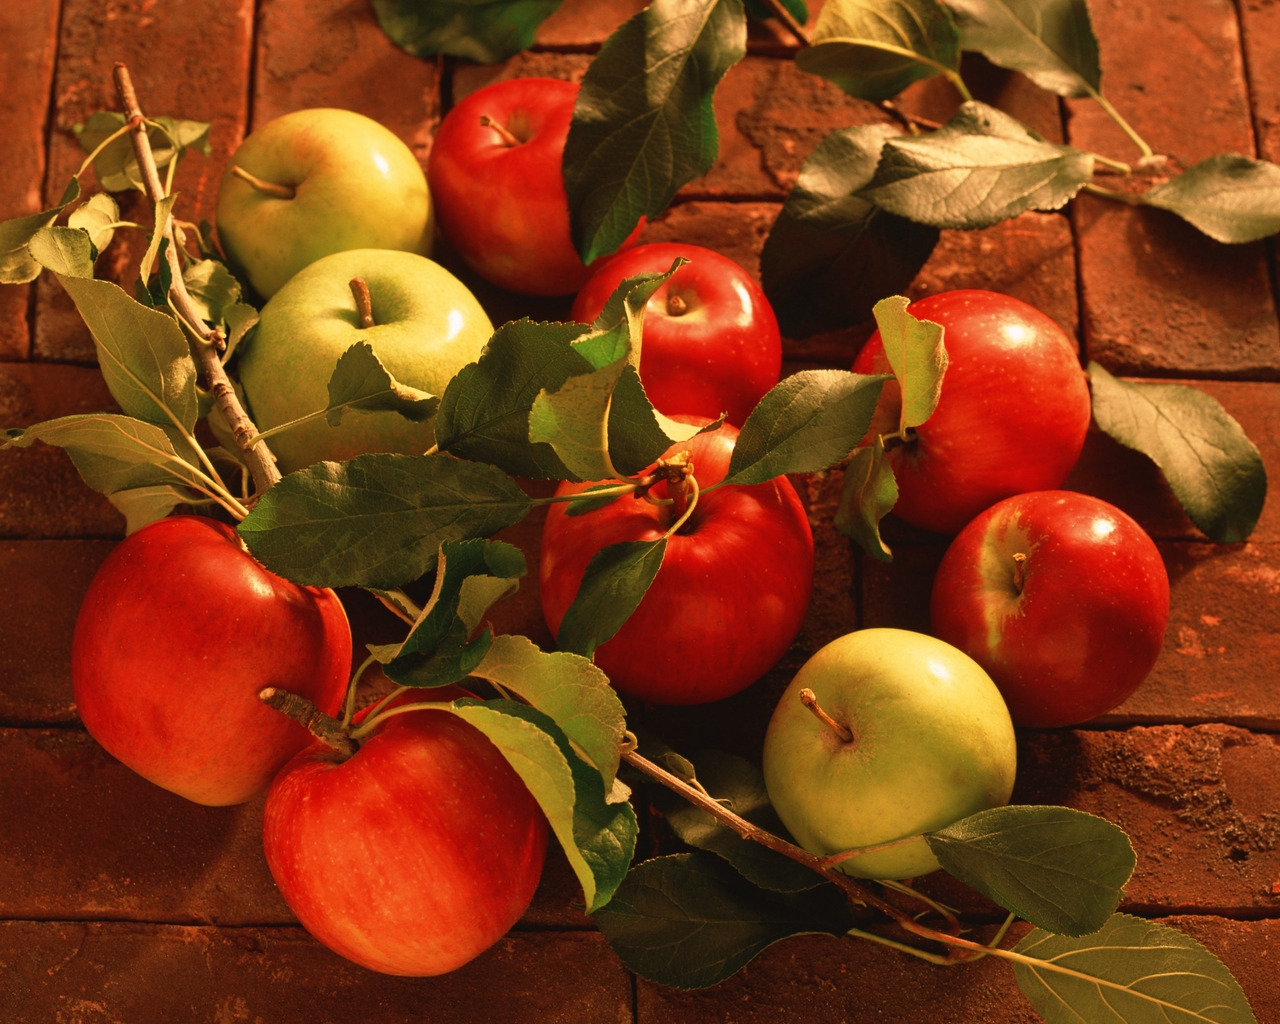 Green and Red Apples for 1280 x 1024 resolution